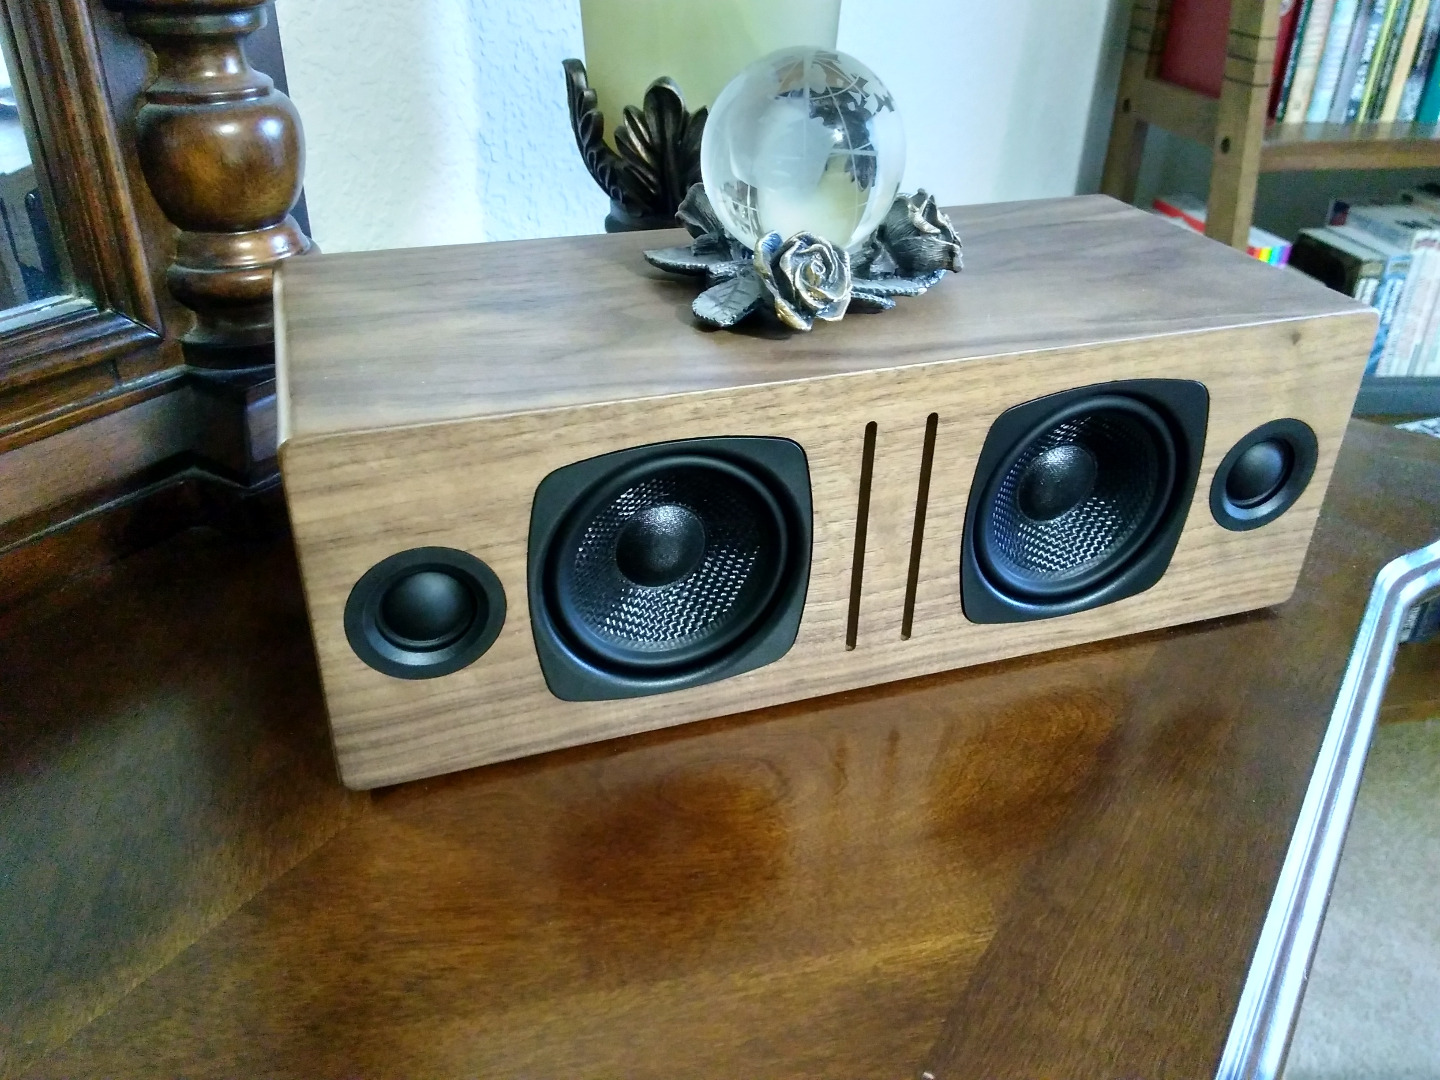 Audioengine B2 a serious speaker, for serious listeners (Review